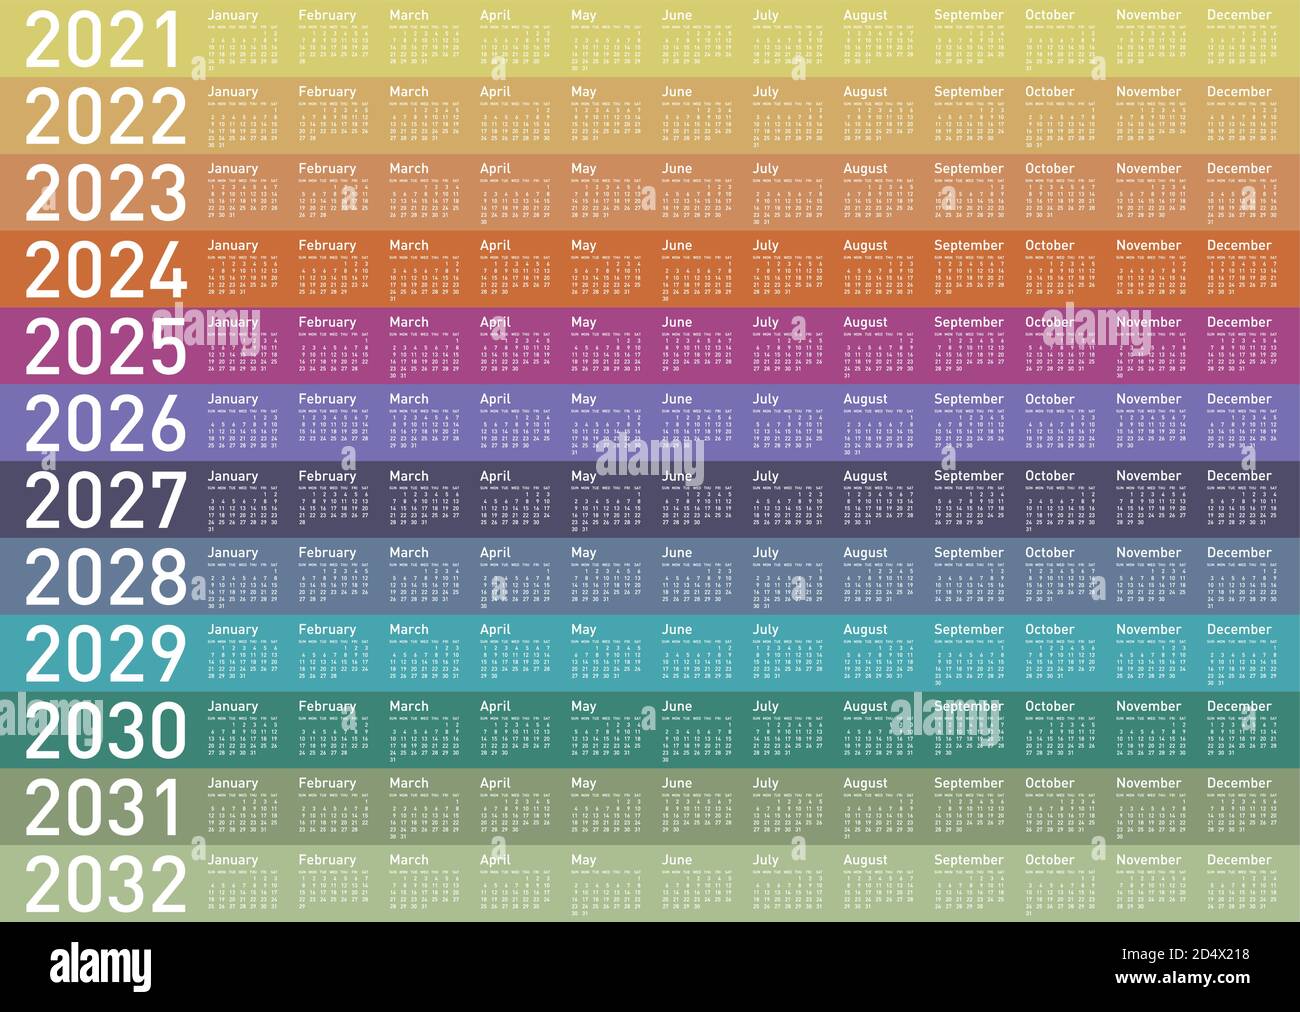 Colorful Calendar For Years 2021 2022 2023 2024 2025 2026 2027